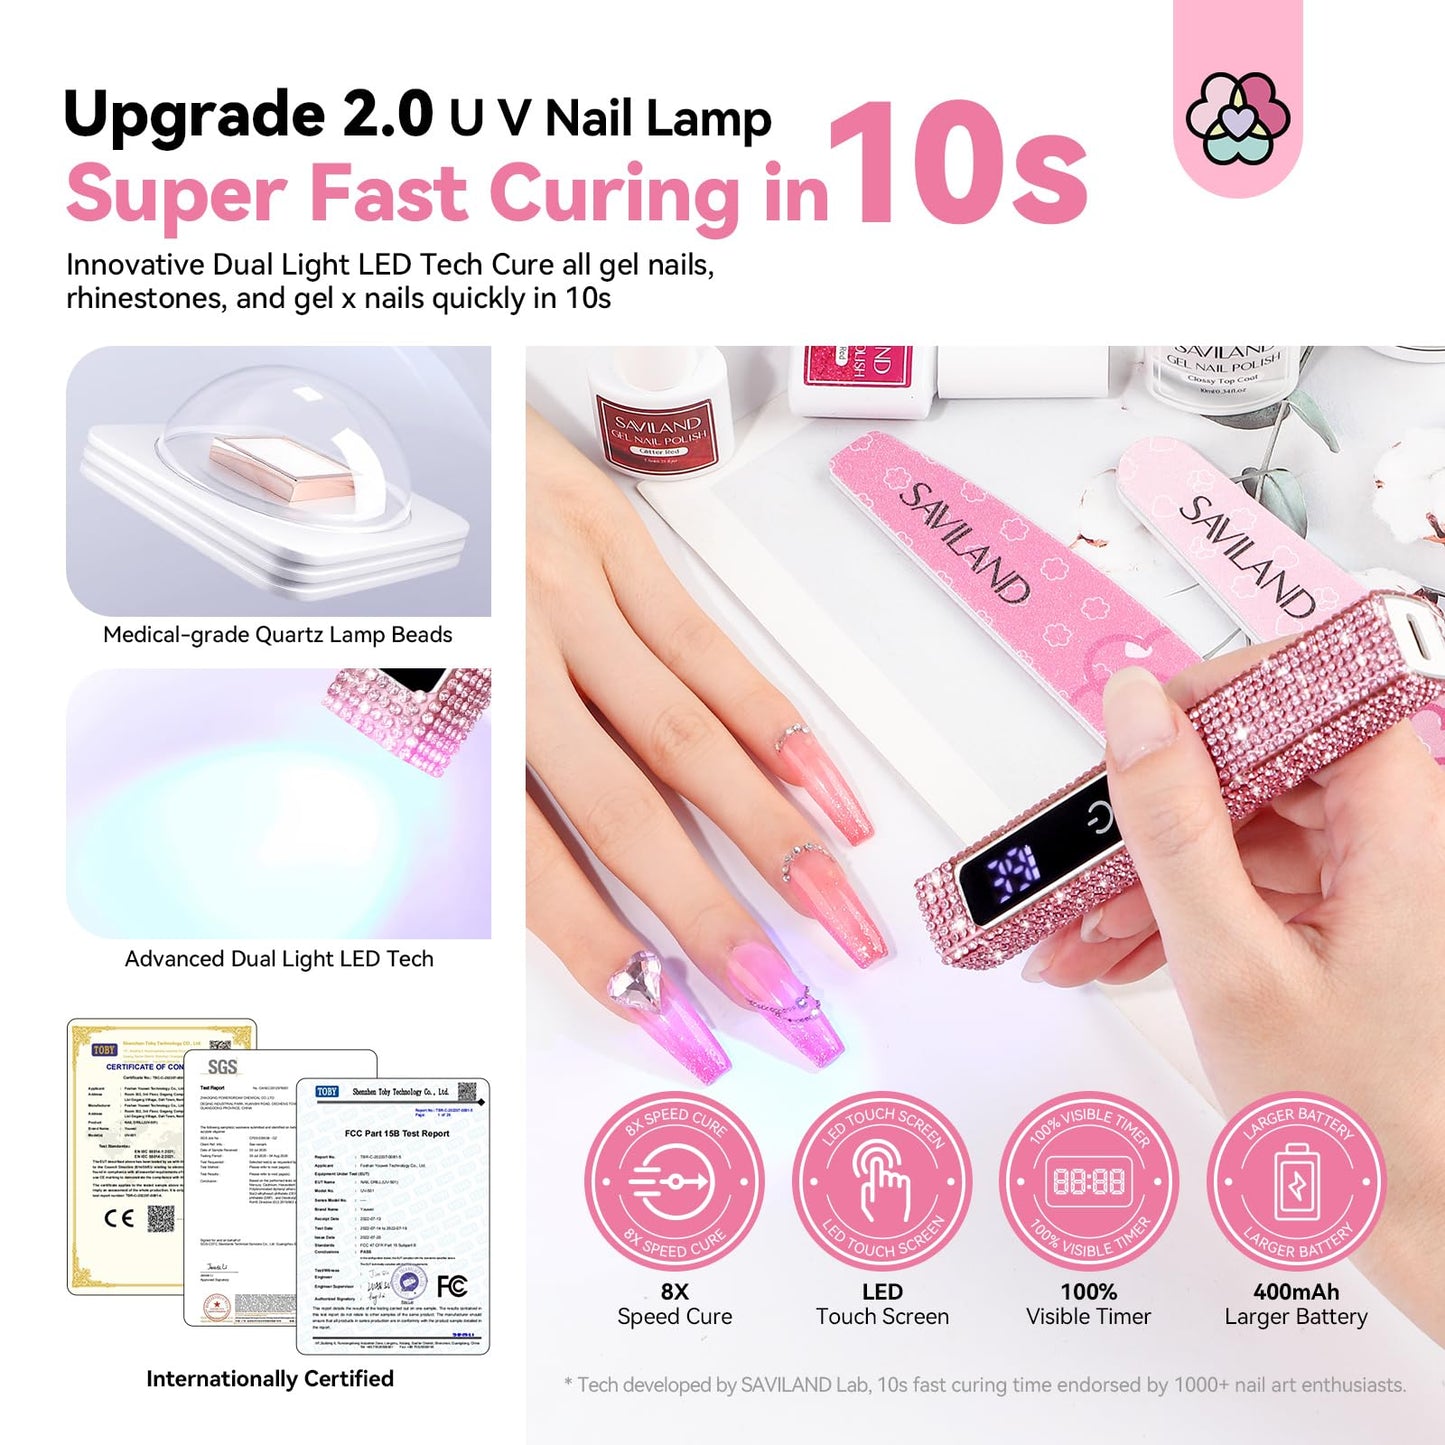 SAVILAND Glitter U V Light for Gel Nails: 2024 12W LCD Screen Handheld U V Nail Lamp 8X-Faster Cure LED Lamp Visible Timer Touch Screen Gel Nails Lamp Cordless Nail Dryer for Home Salon Use